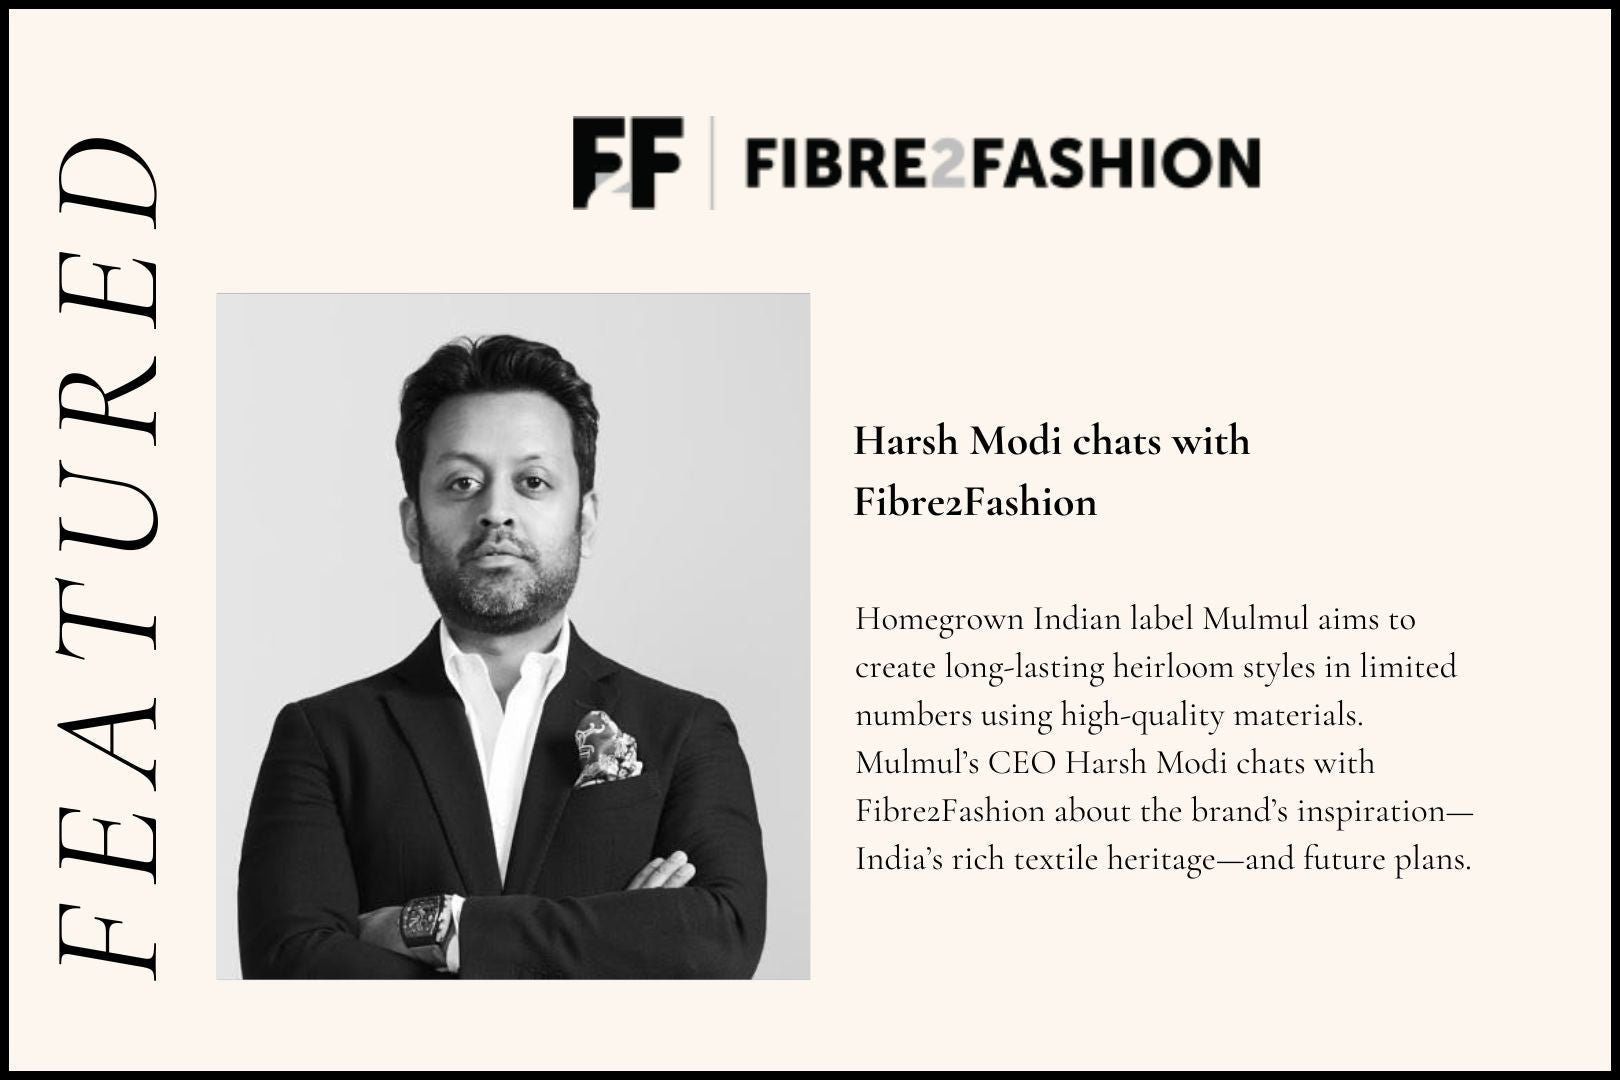 Mulmul’s CEO Harsh Modi chats with Fibre2Fashion about the brand’s inspiration—India’s rich textile heritage—and future plans. - Shop Mulmul